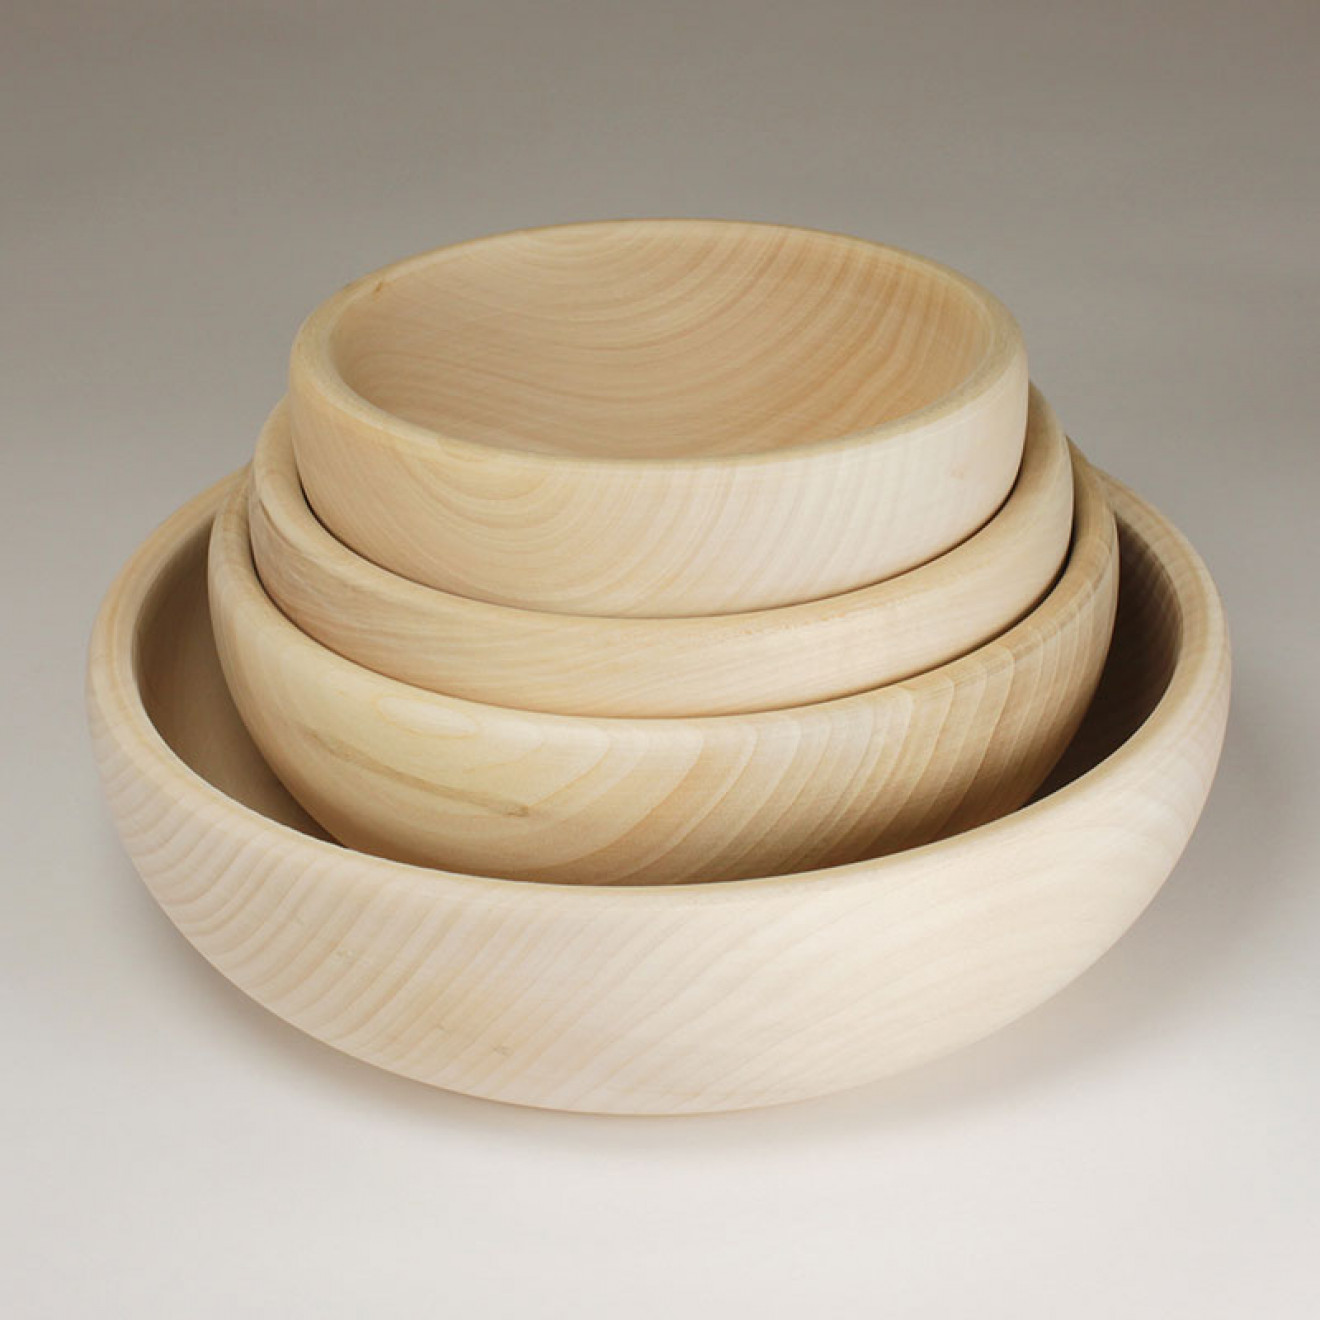 Set with four Wooden Bowls 6.29, 7.08, 7.87, 9.84Inches (16, 18, 20,25cm)